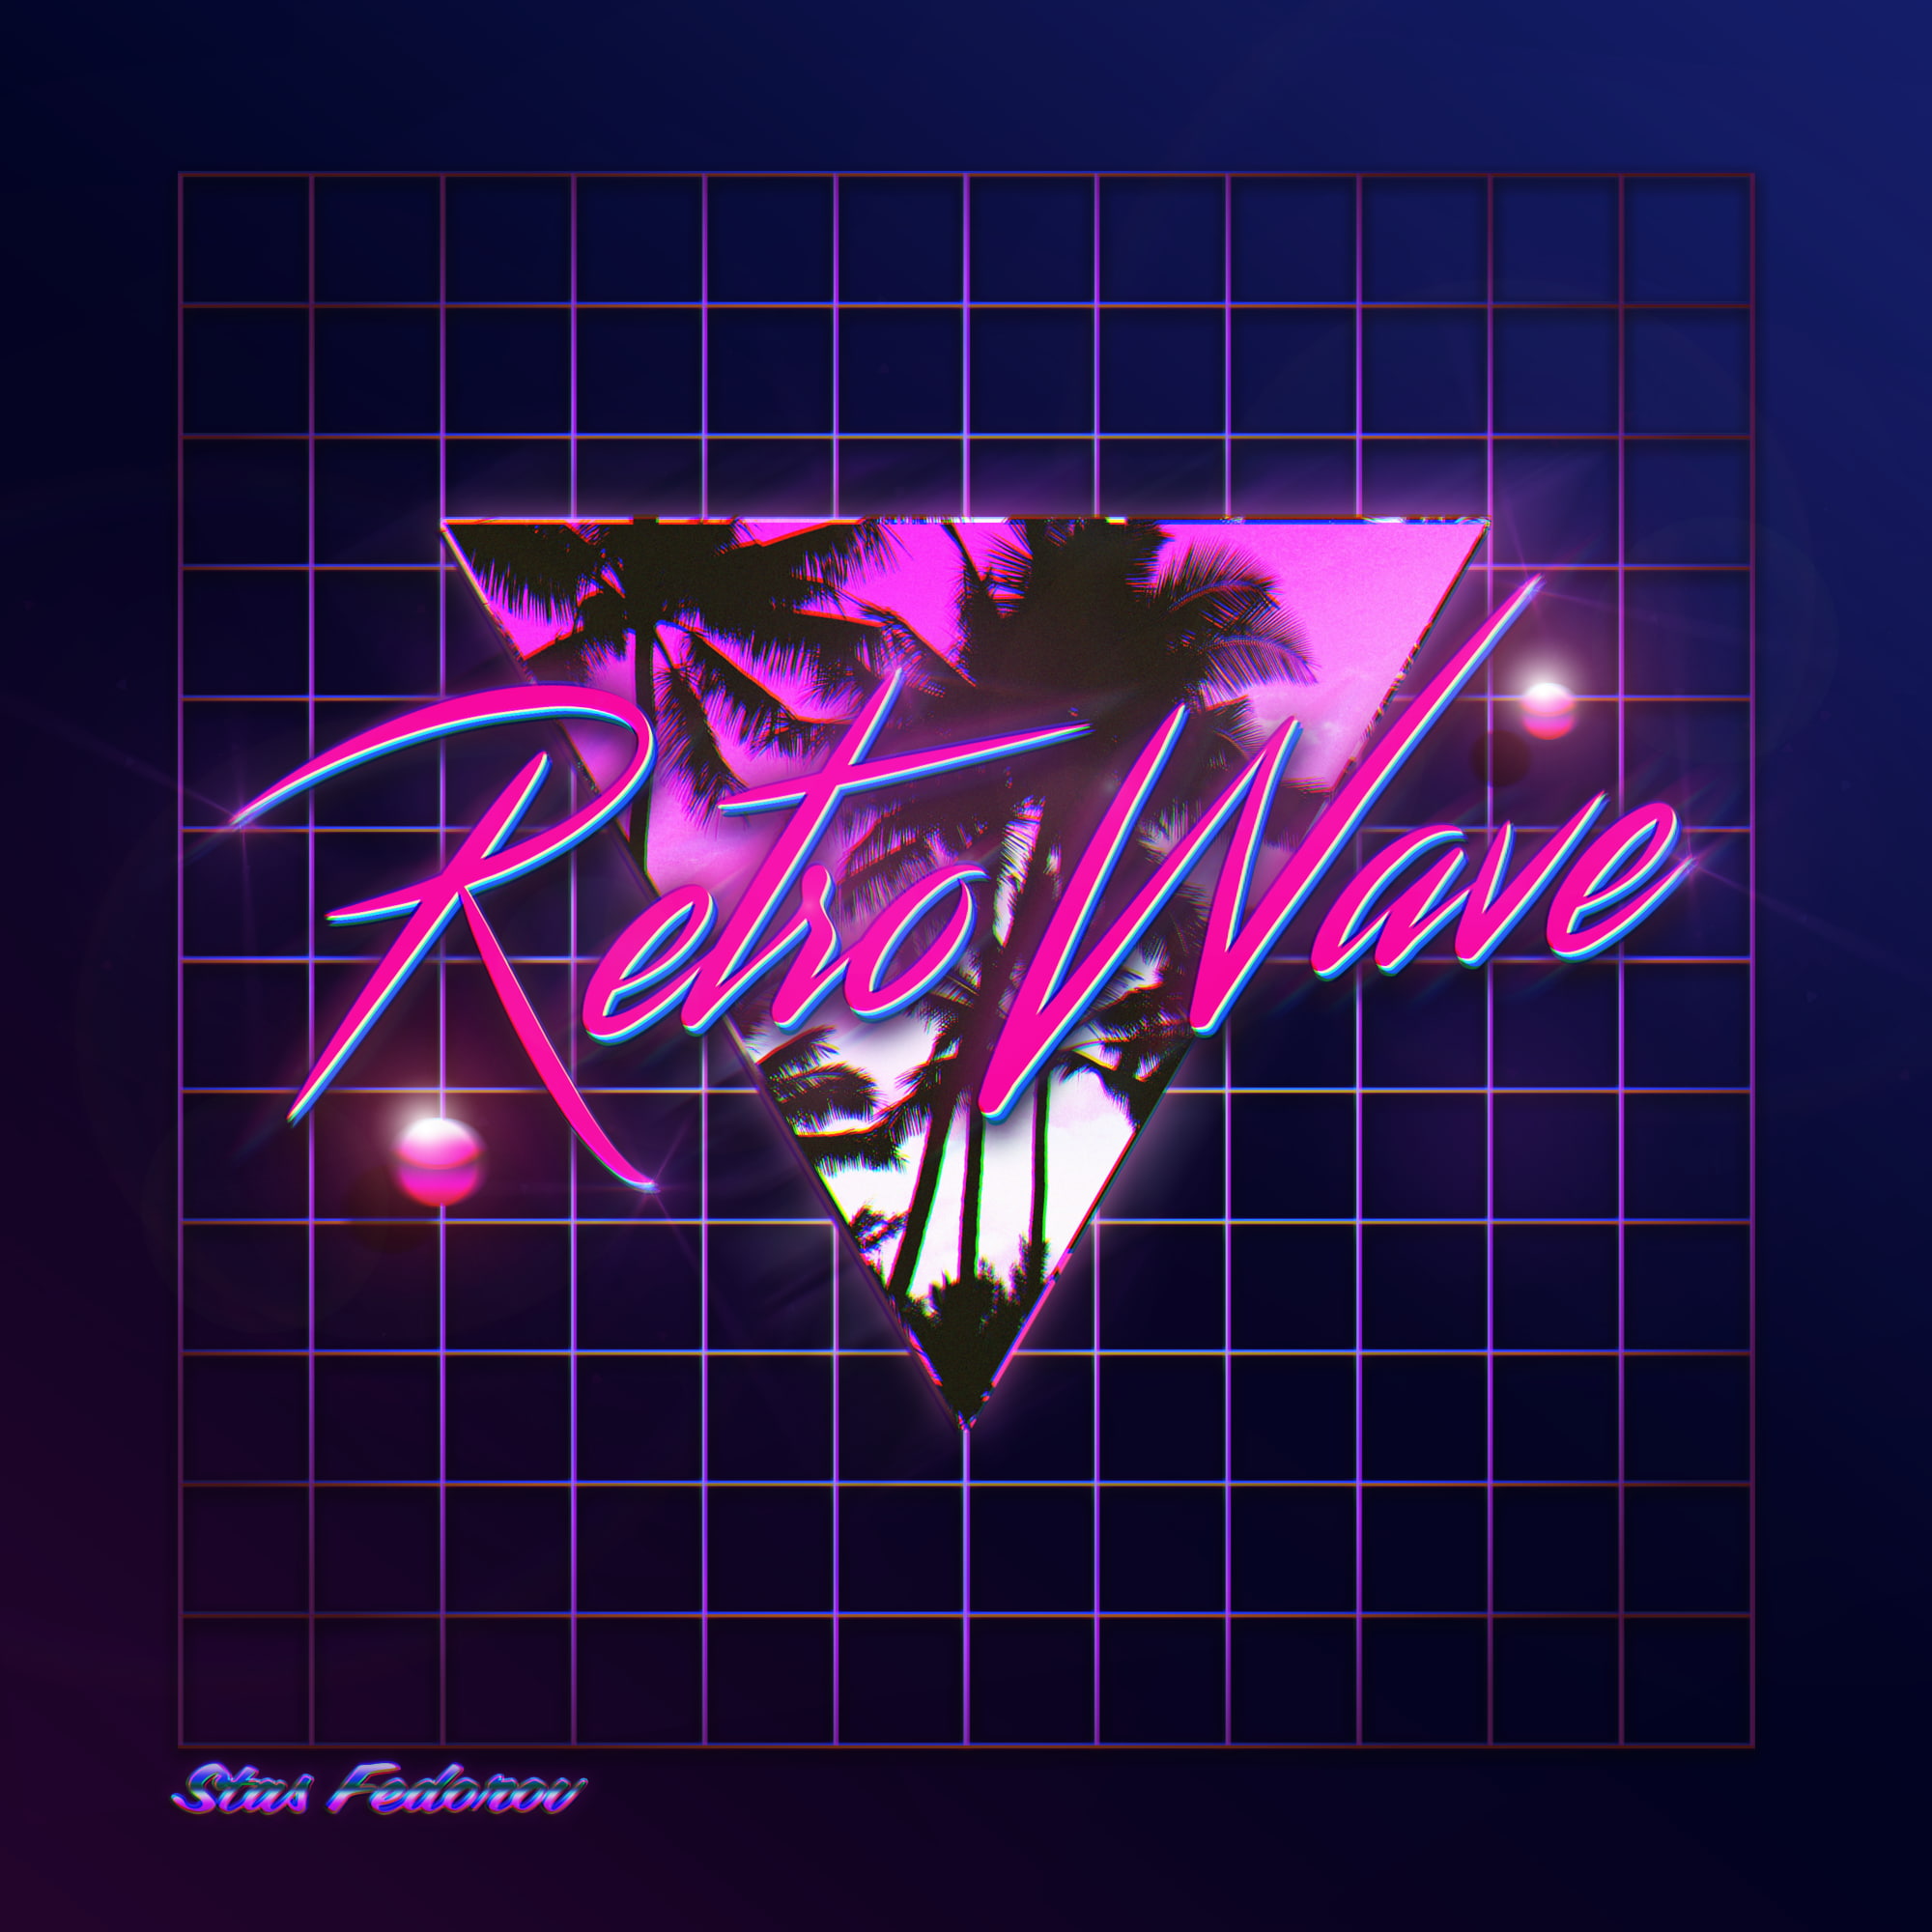 Synthwave - HD Wallpaper 